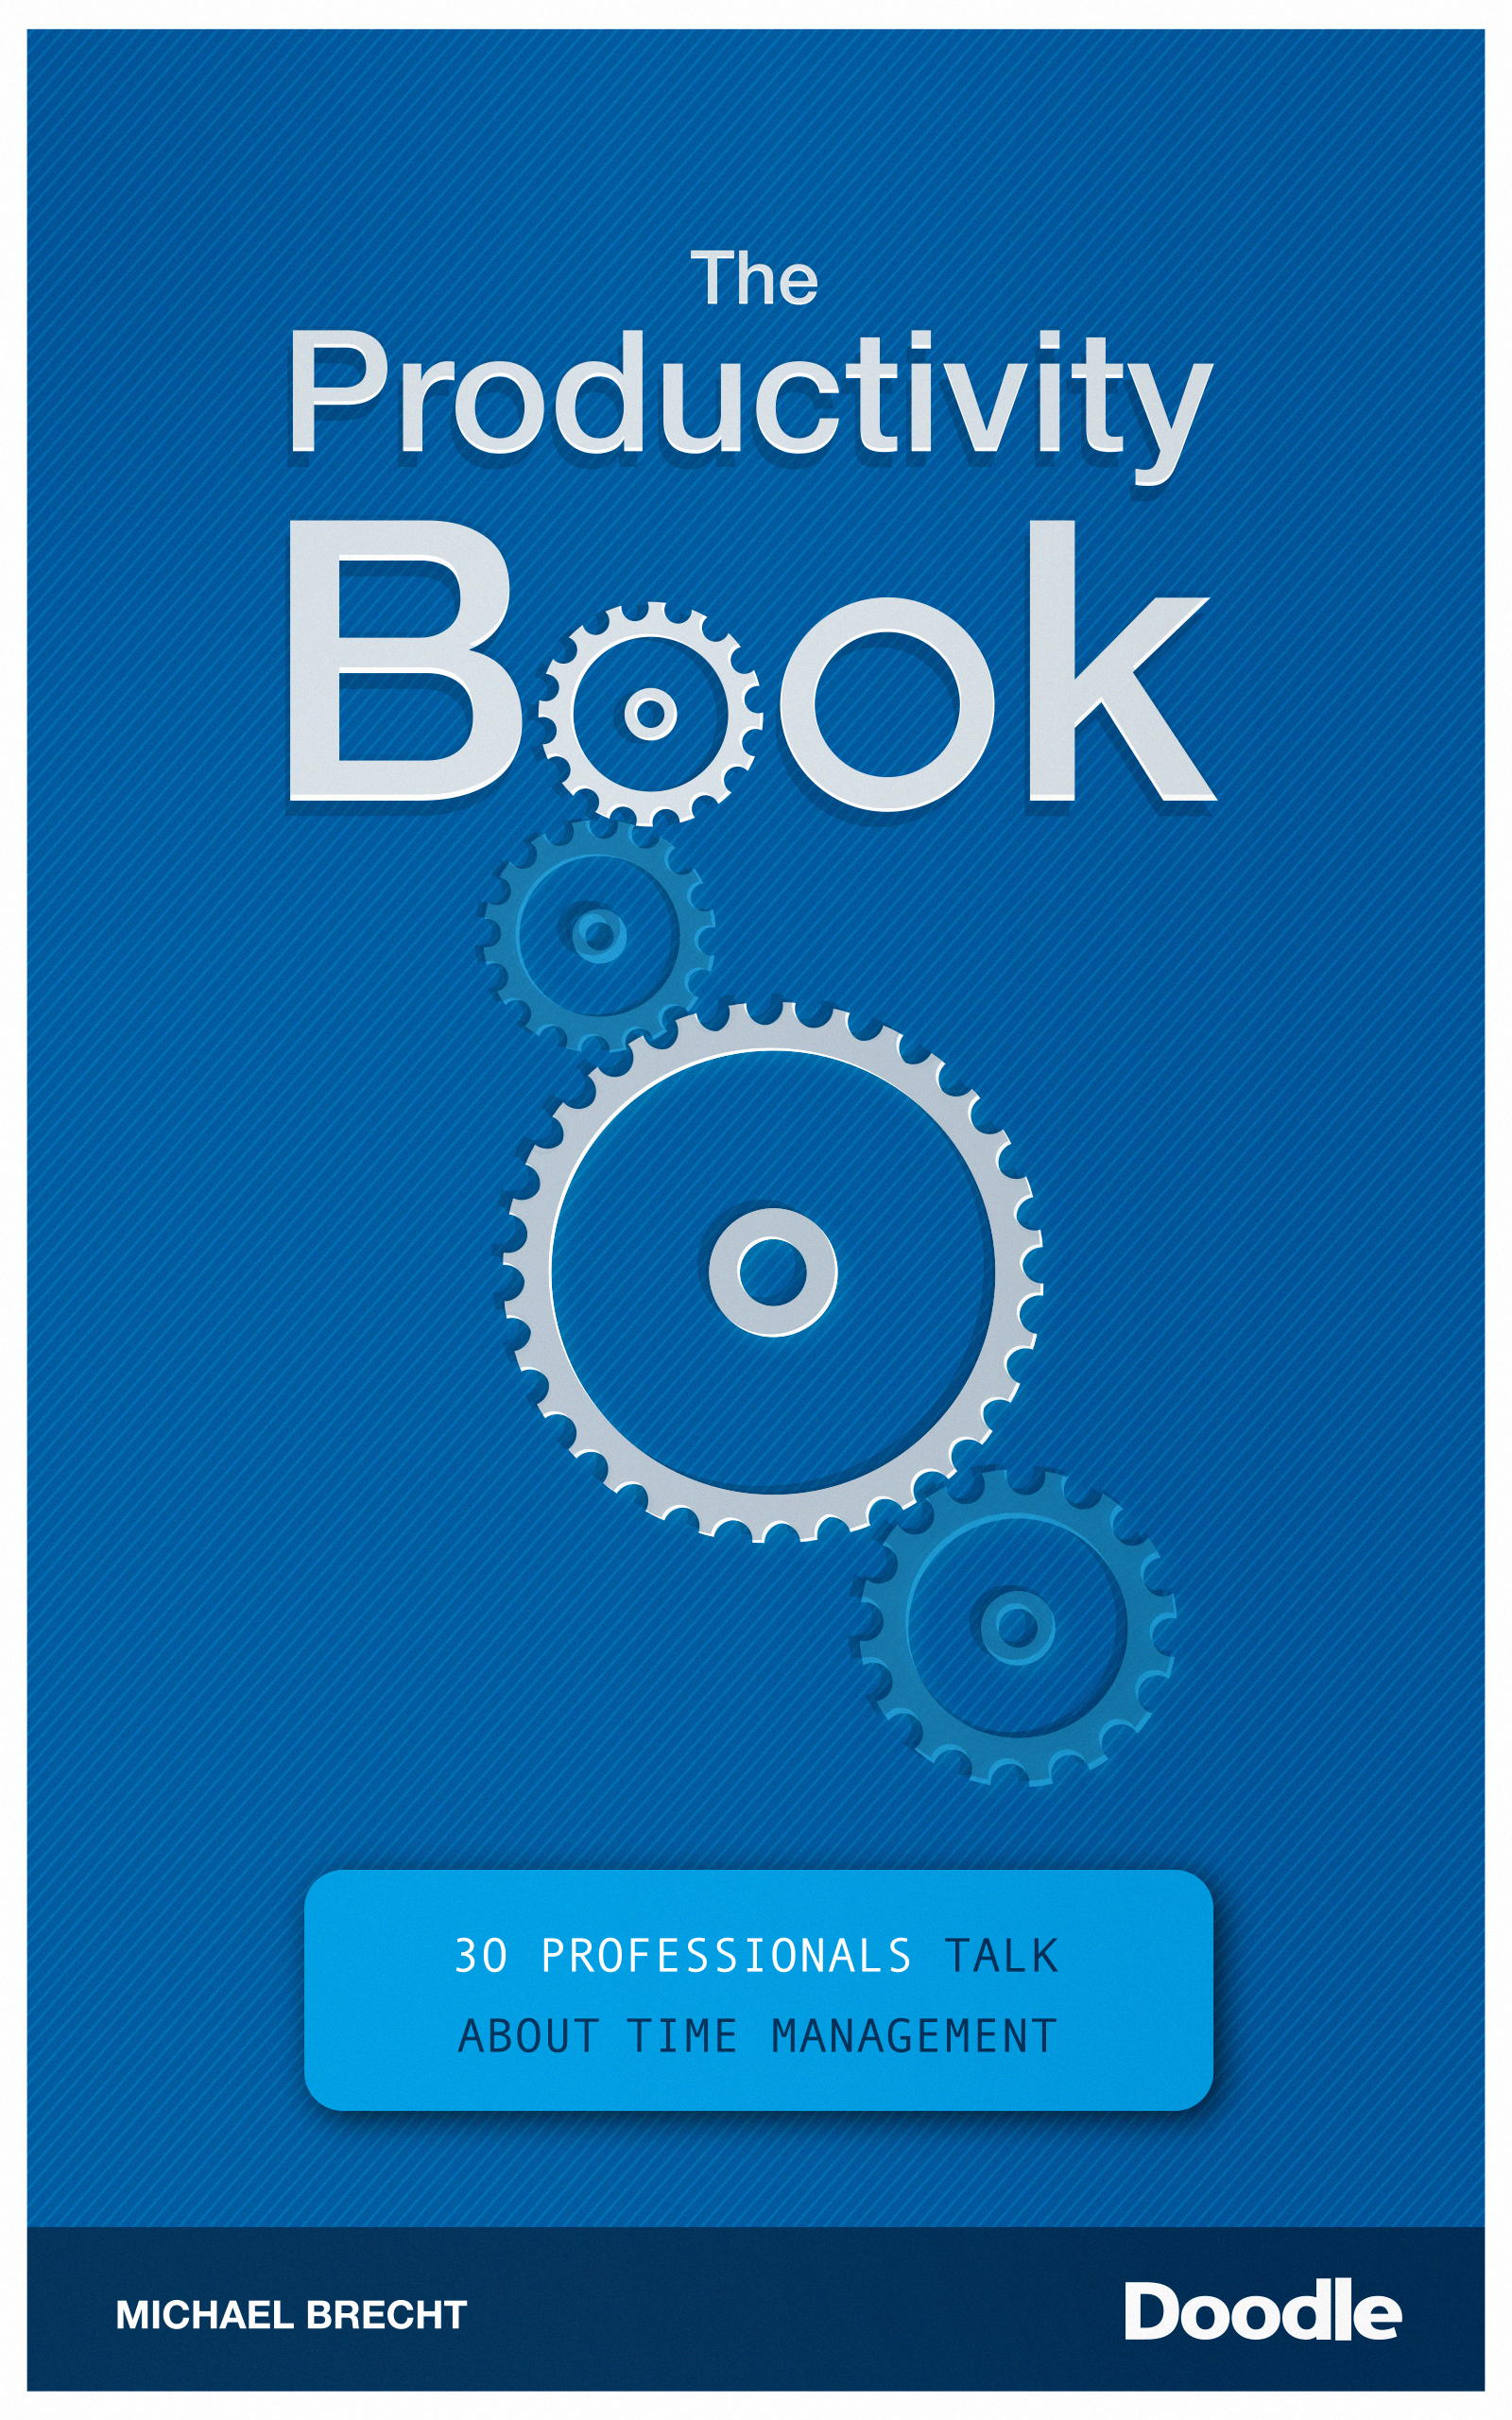 TheProductivityBook_frontcover